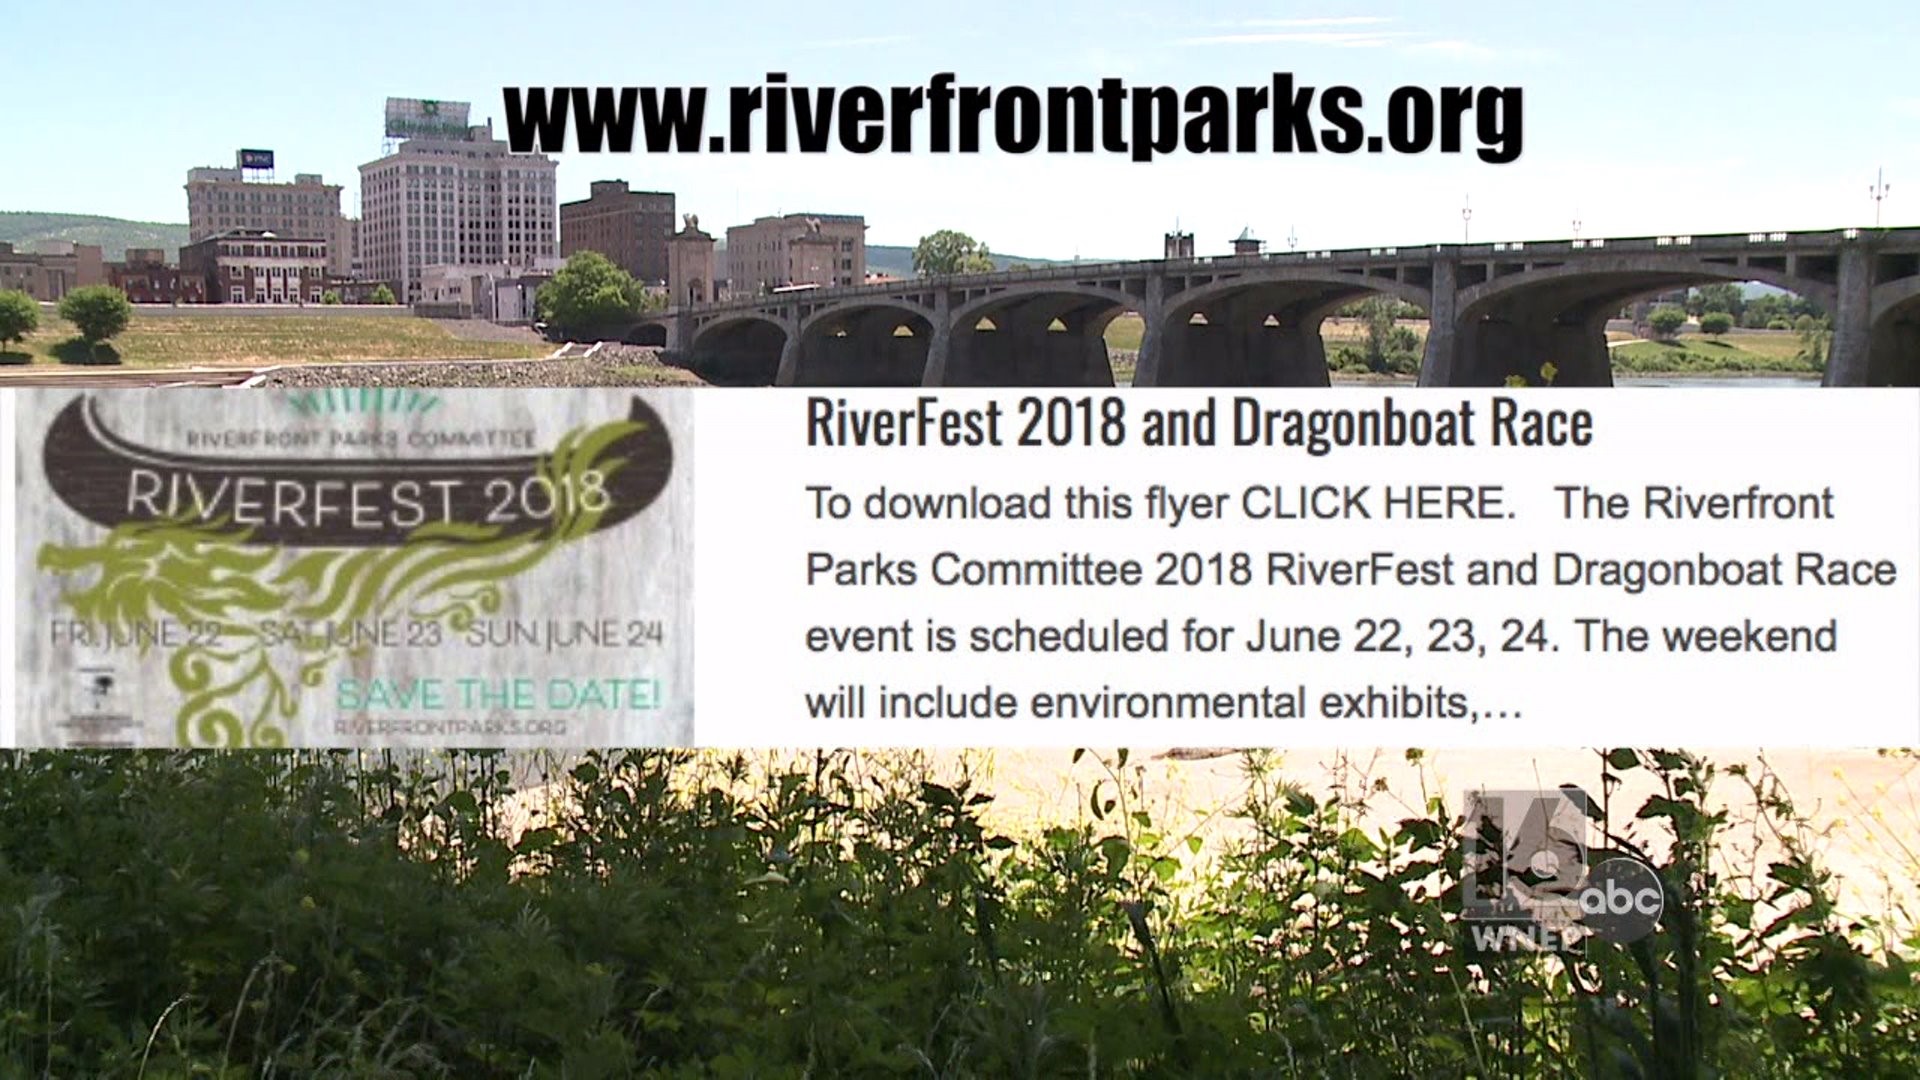 Riverfest 2018 This Weekend